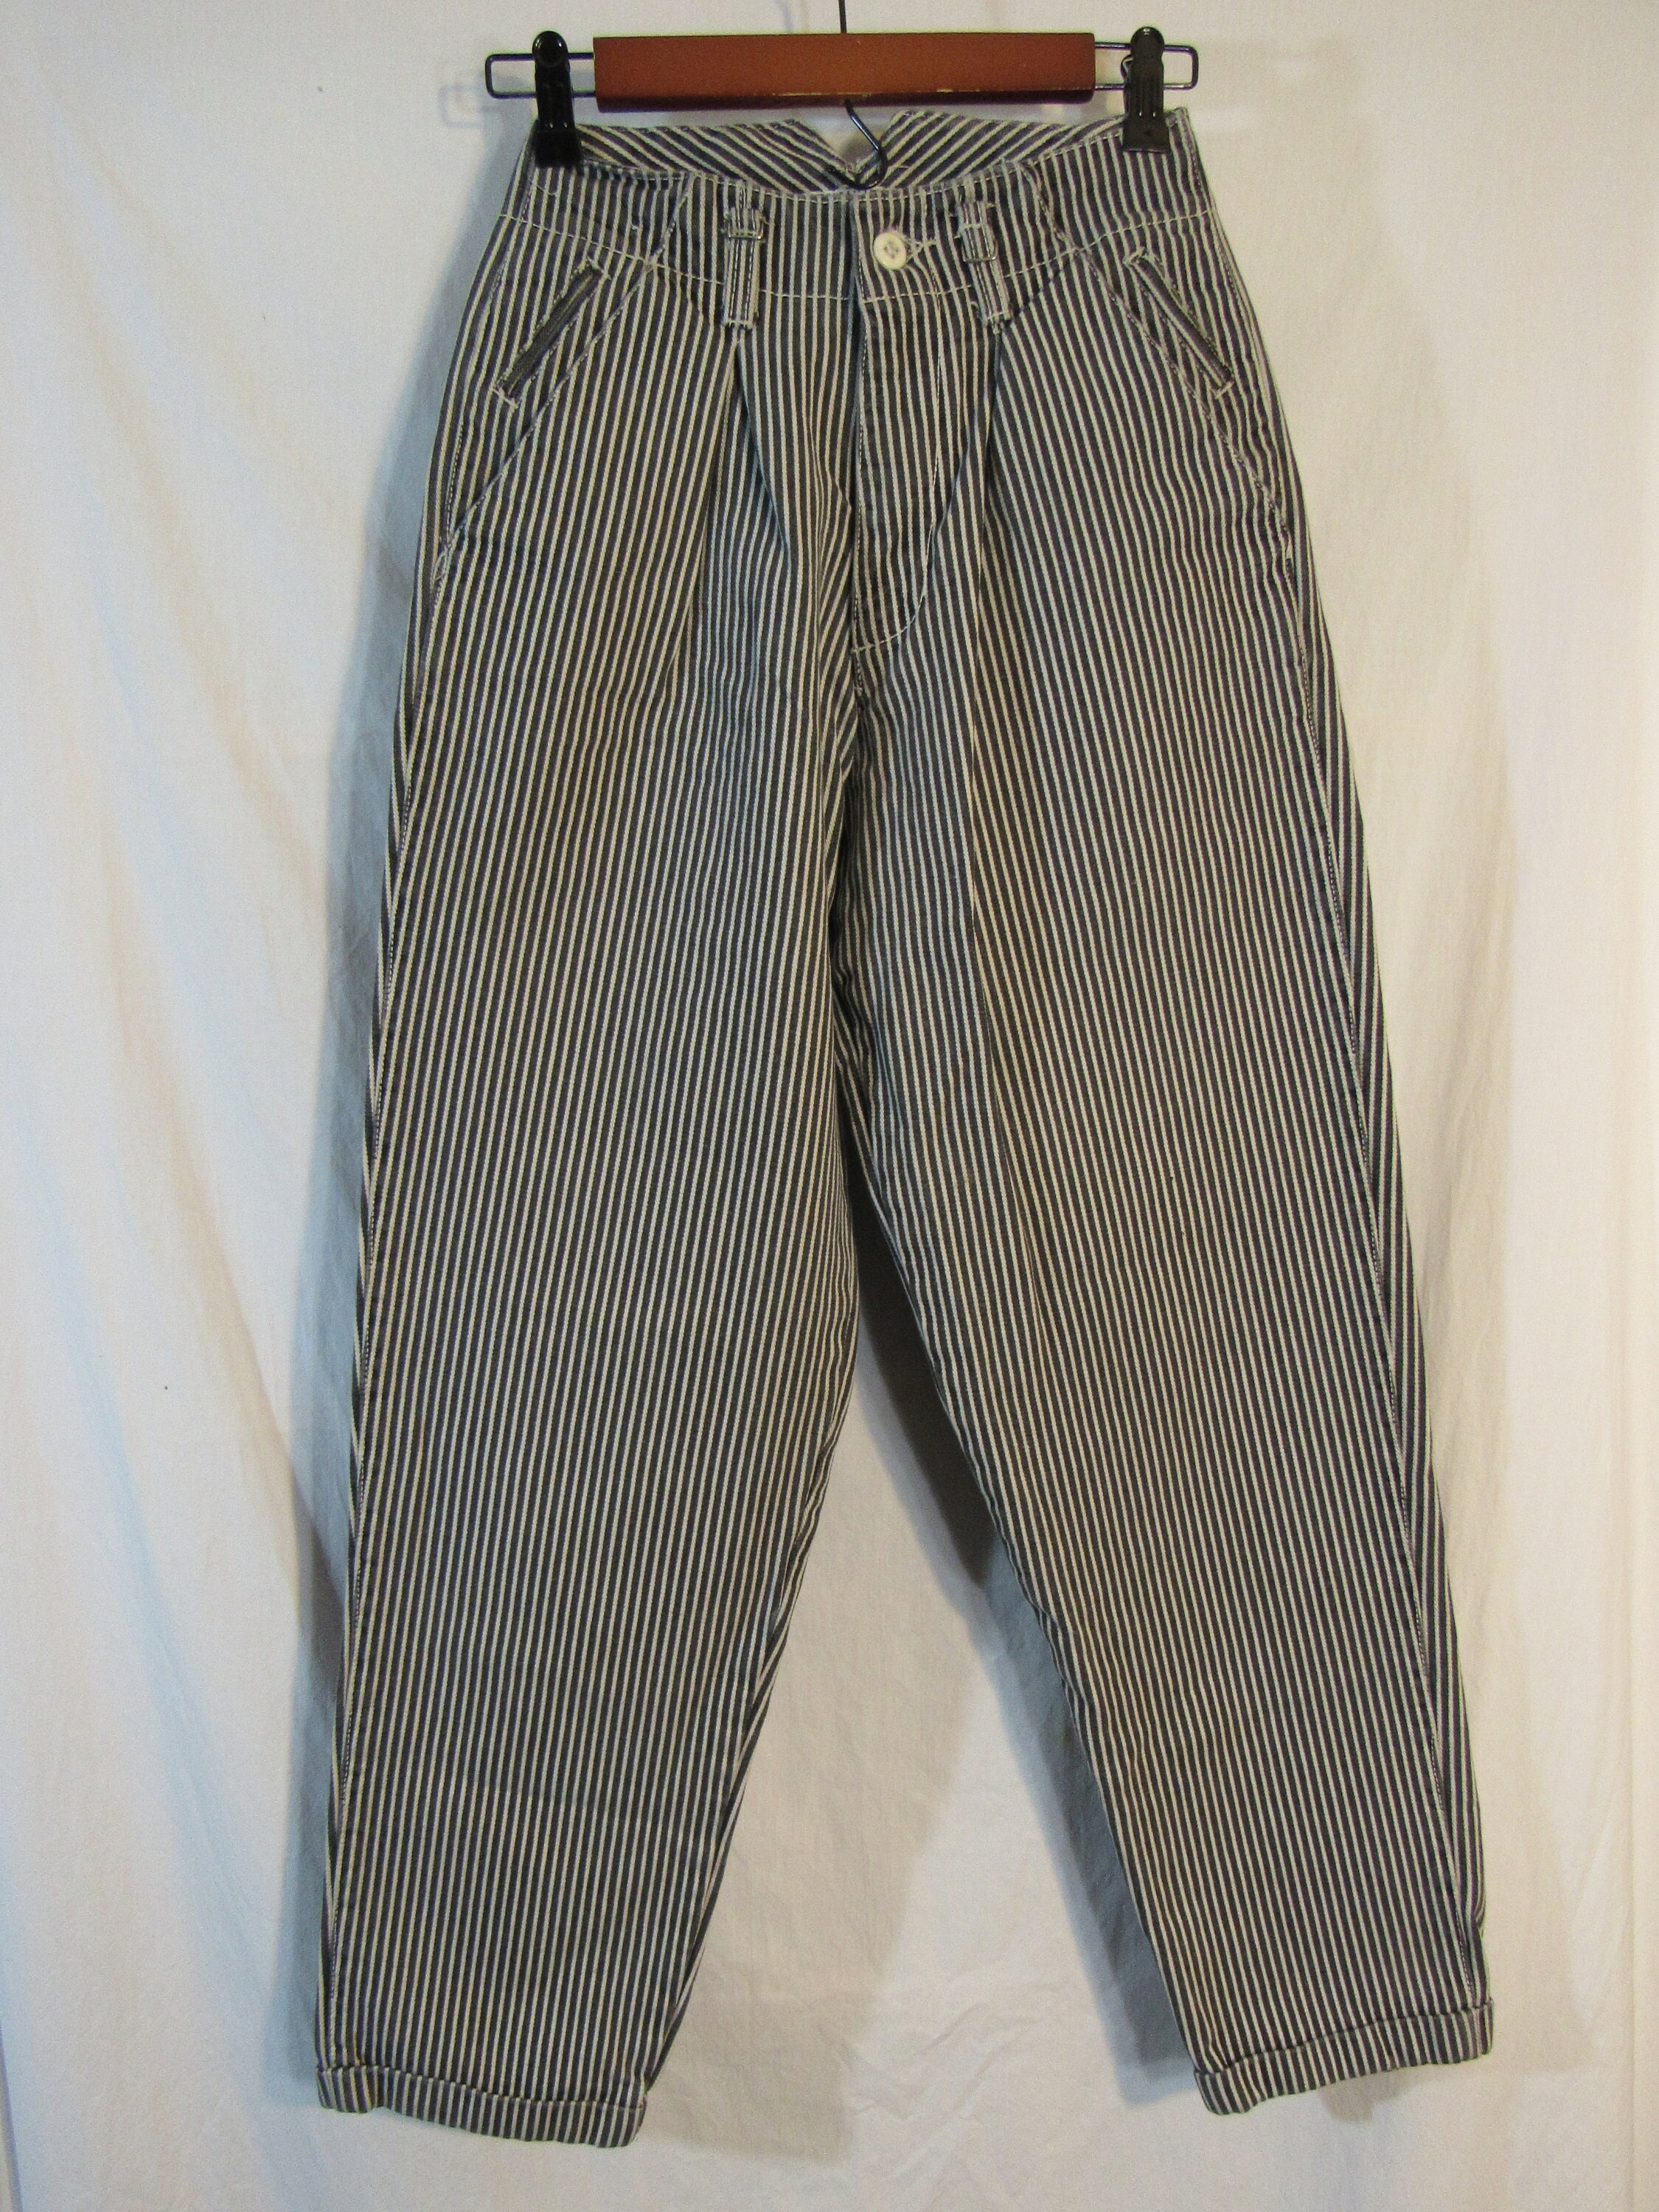 80s Striped Jeans - Etsy